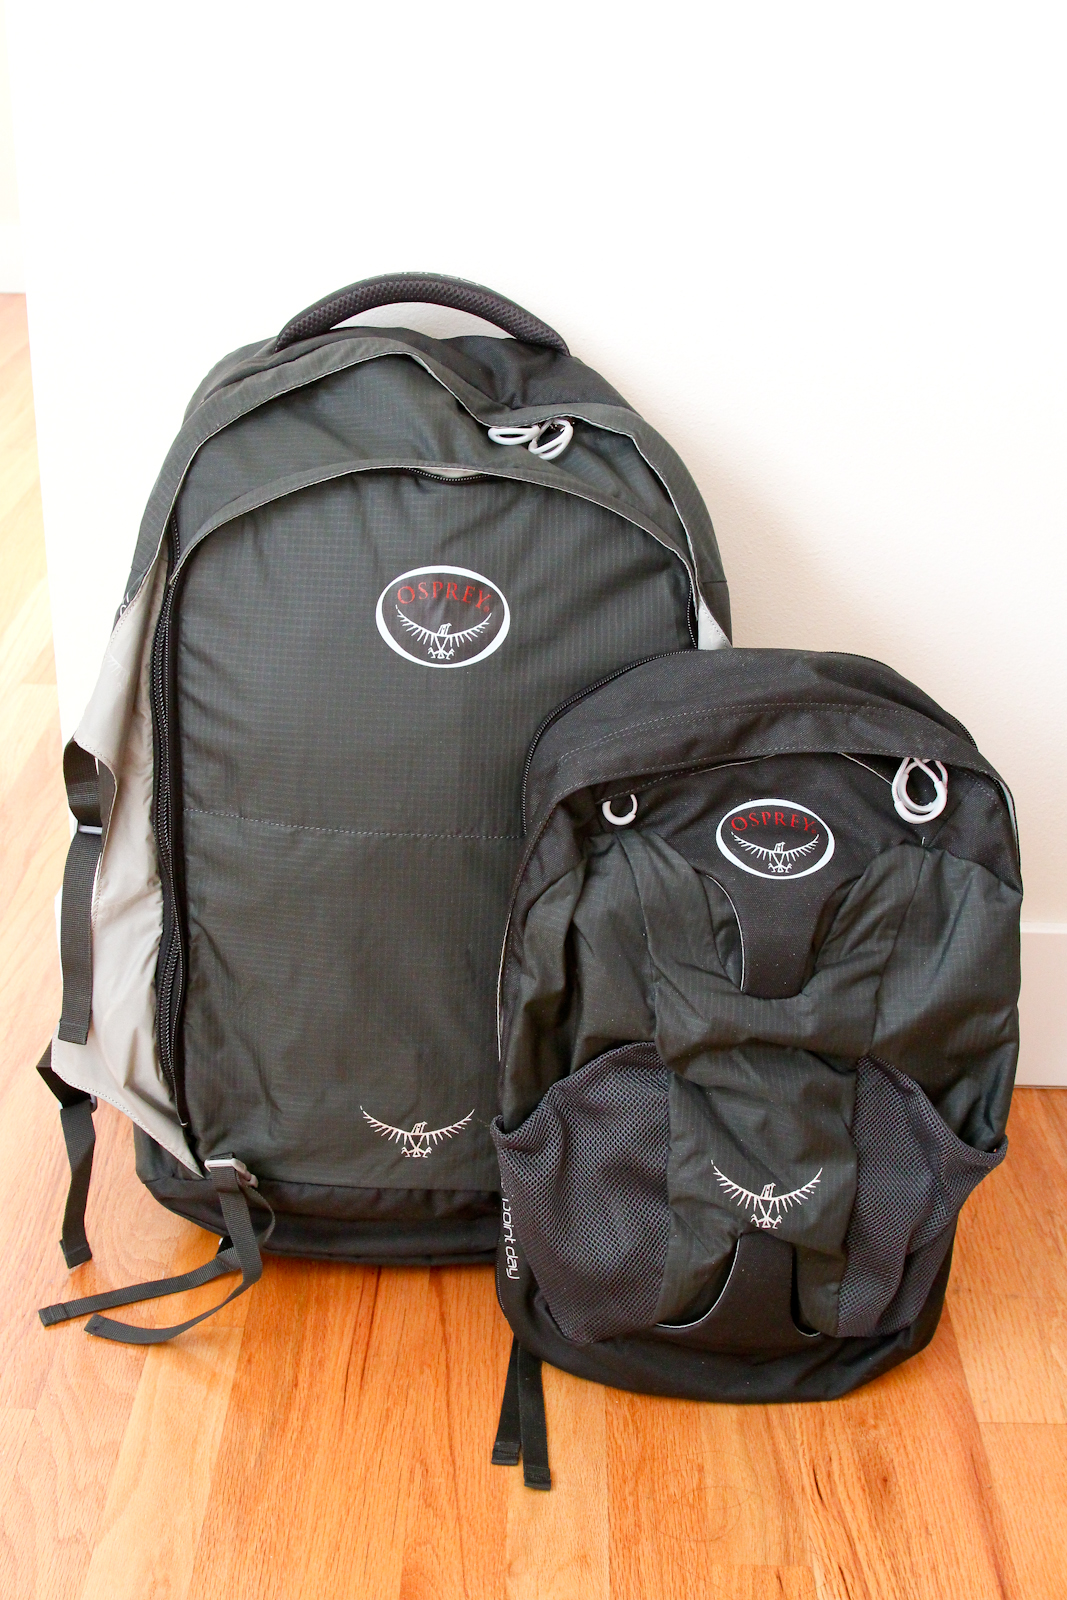 Answering Oliver: Post-Trip Backpack Review: Osprey Farpoint 55